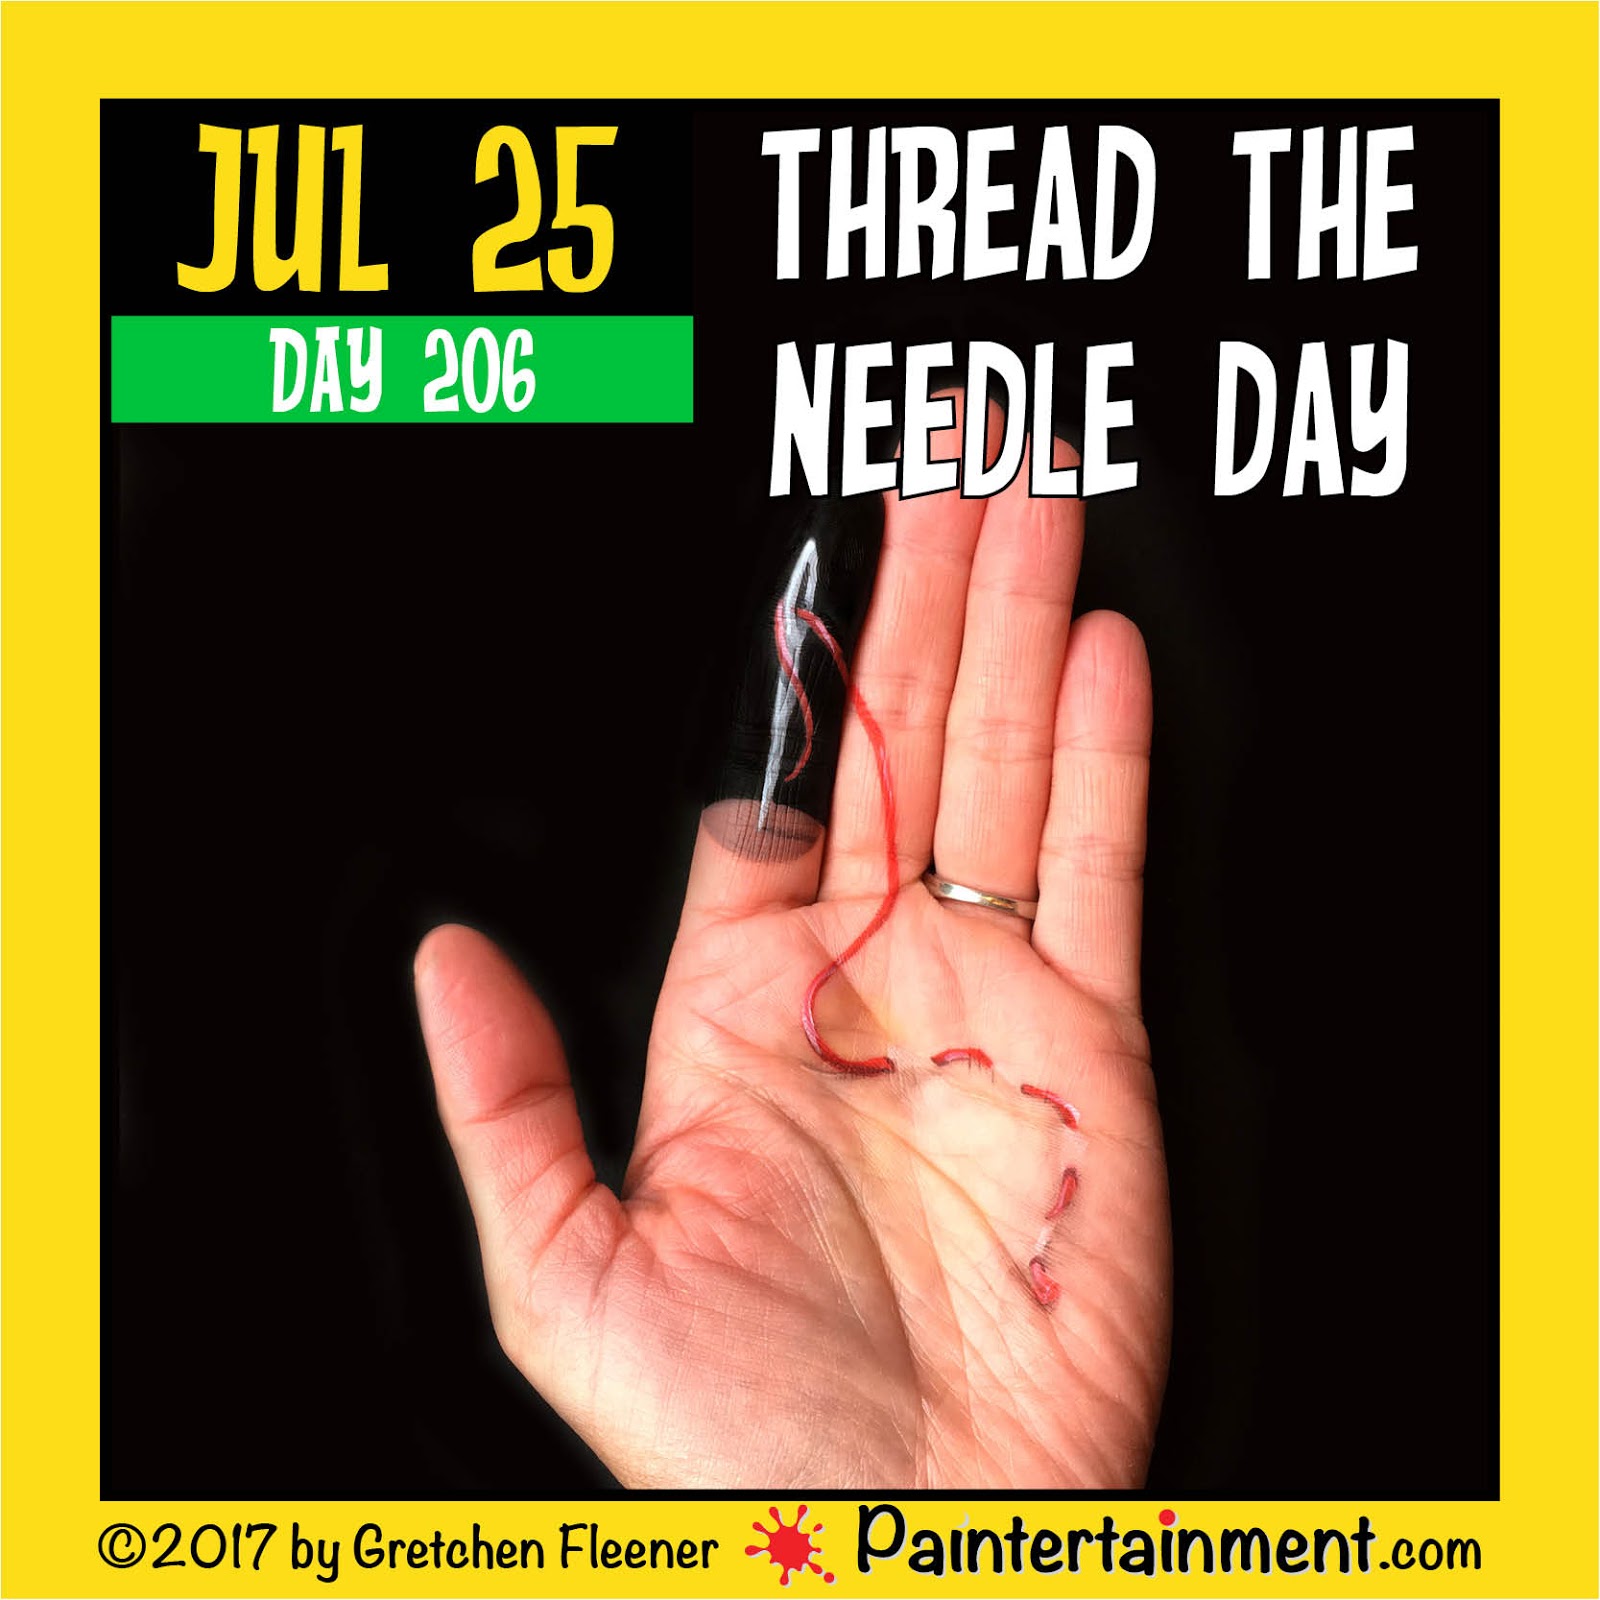 Thread the Needle Day, July 25. Walk a fine Line, Sew Something.